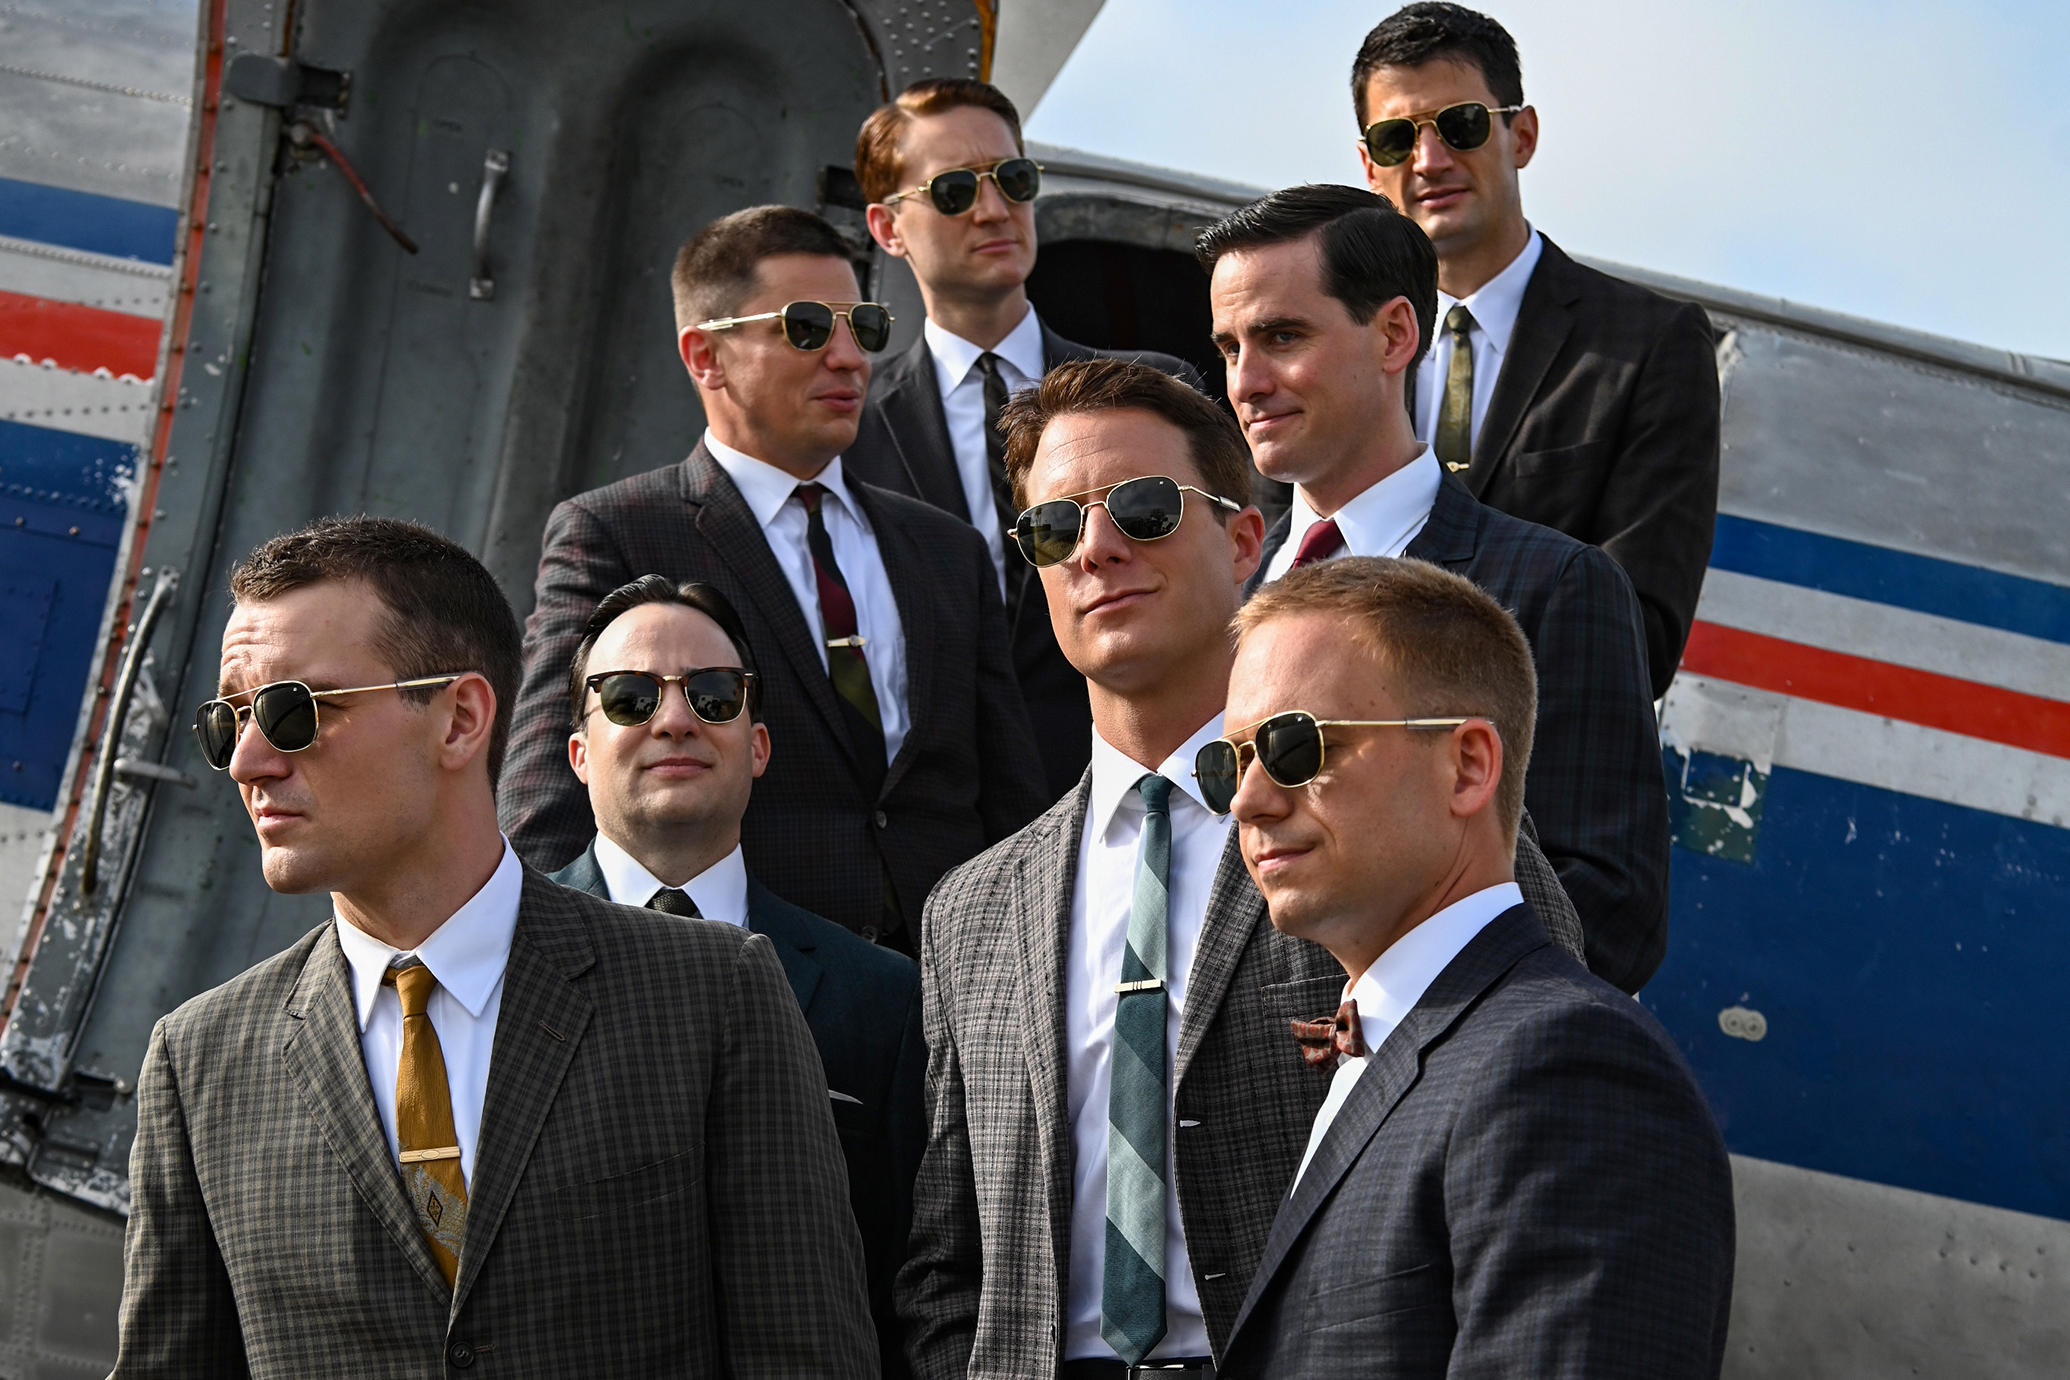 The Right Stuff: What To Expect From The Disney+ Adaptation | Den of Geek